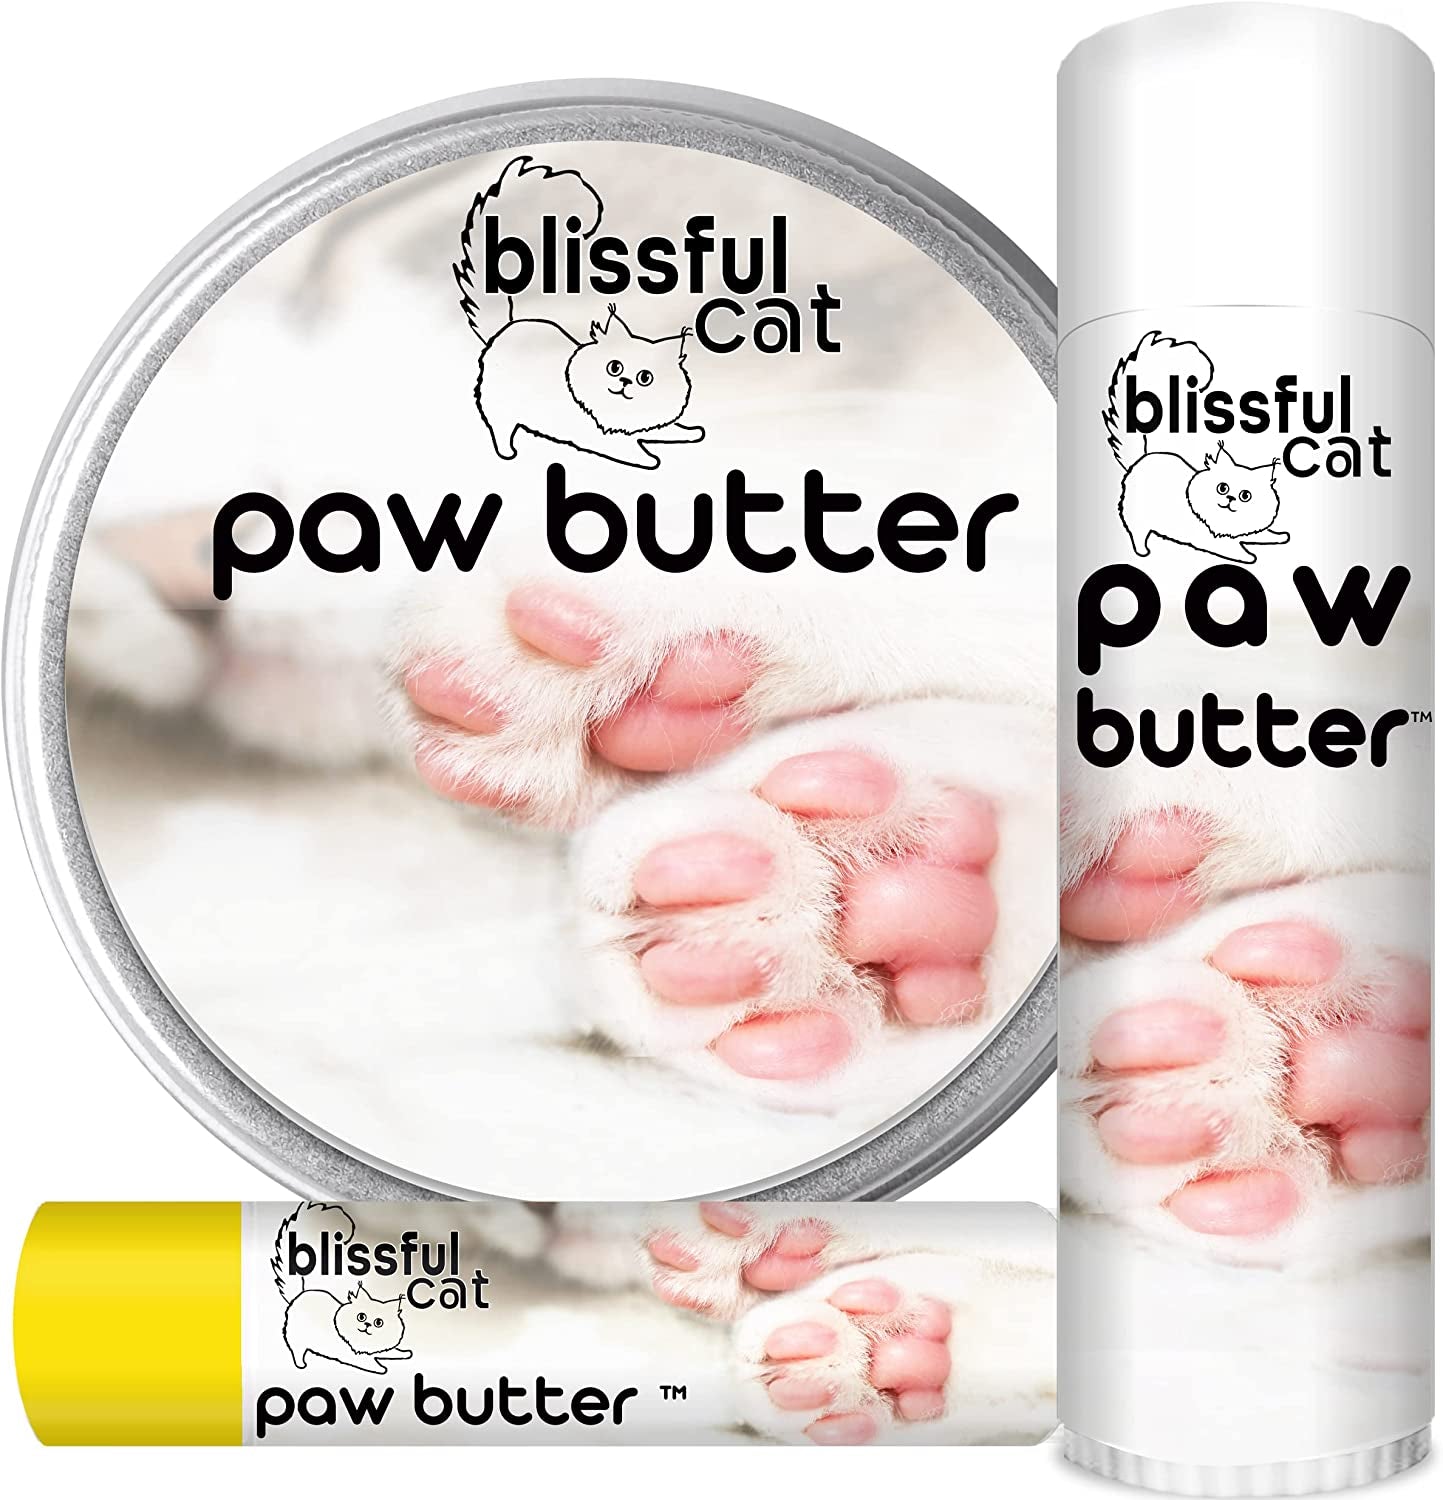 The Blissful Cat Paw Butter